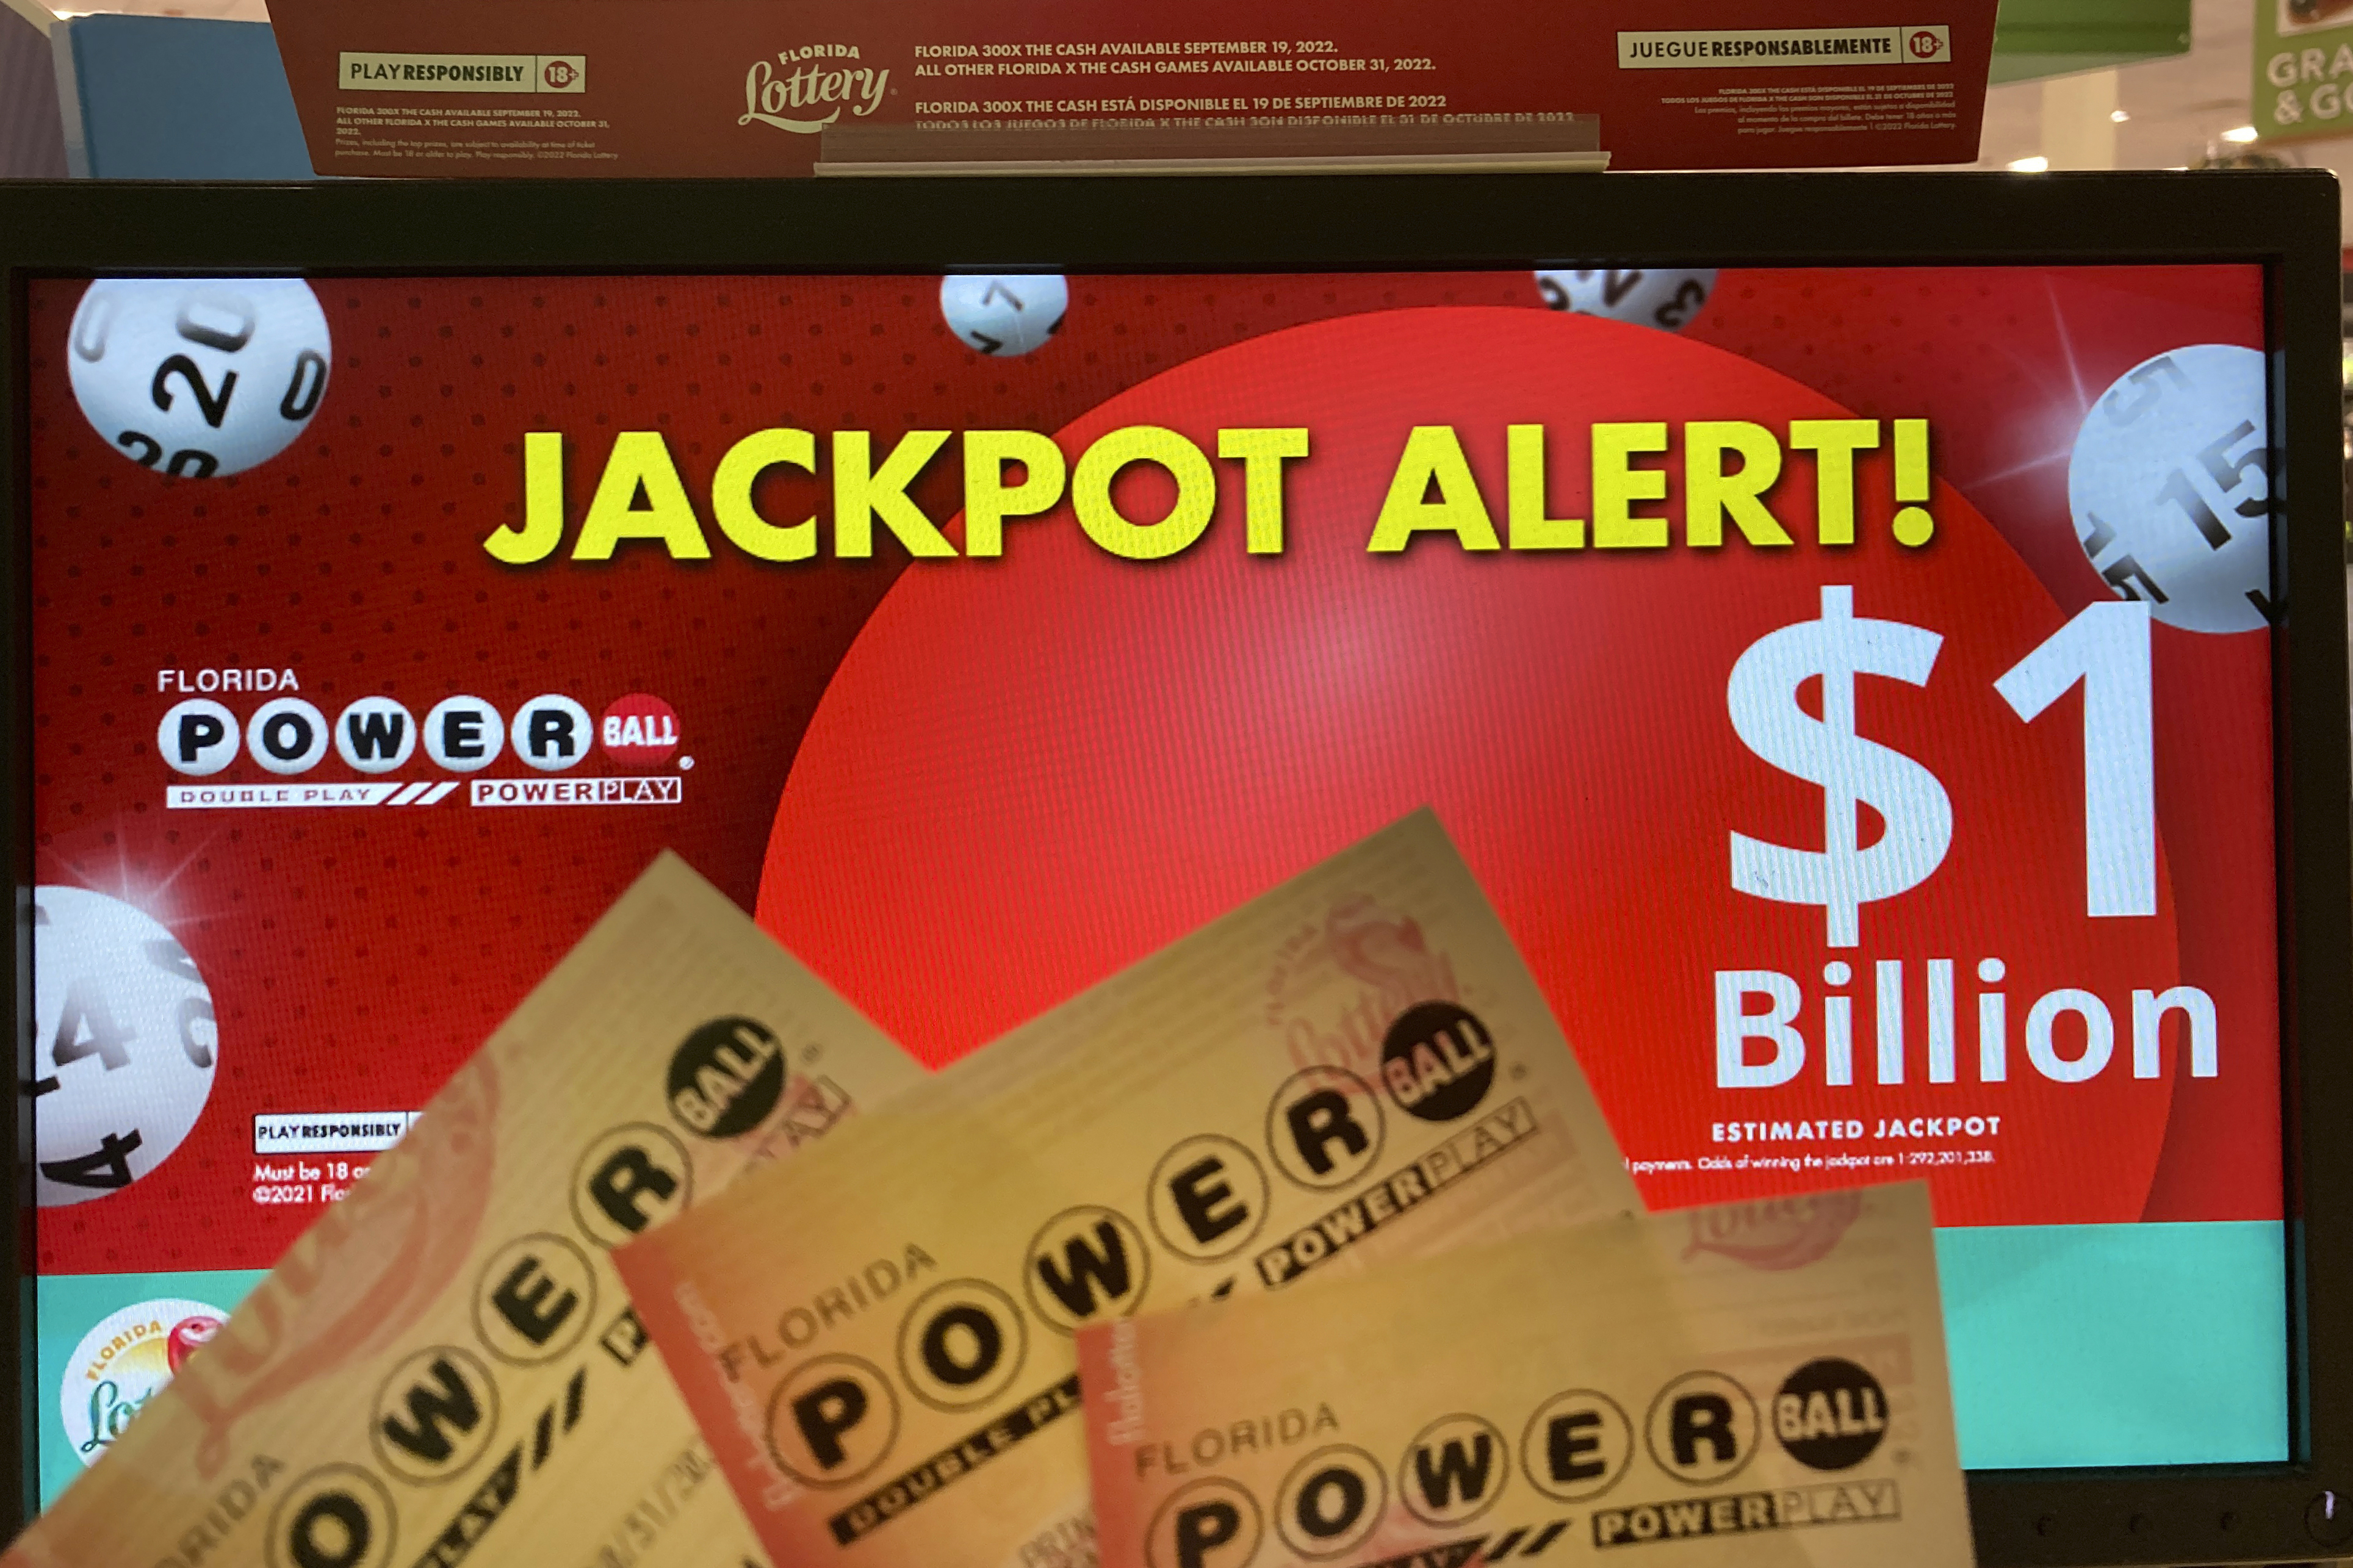 Another winning Powerball ticket, worth $150,000, sold in